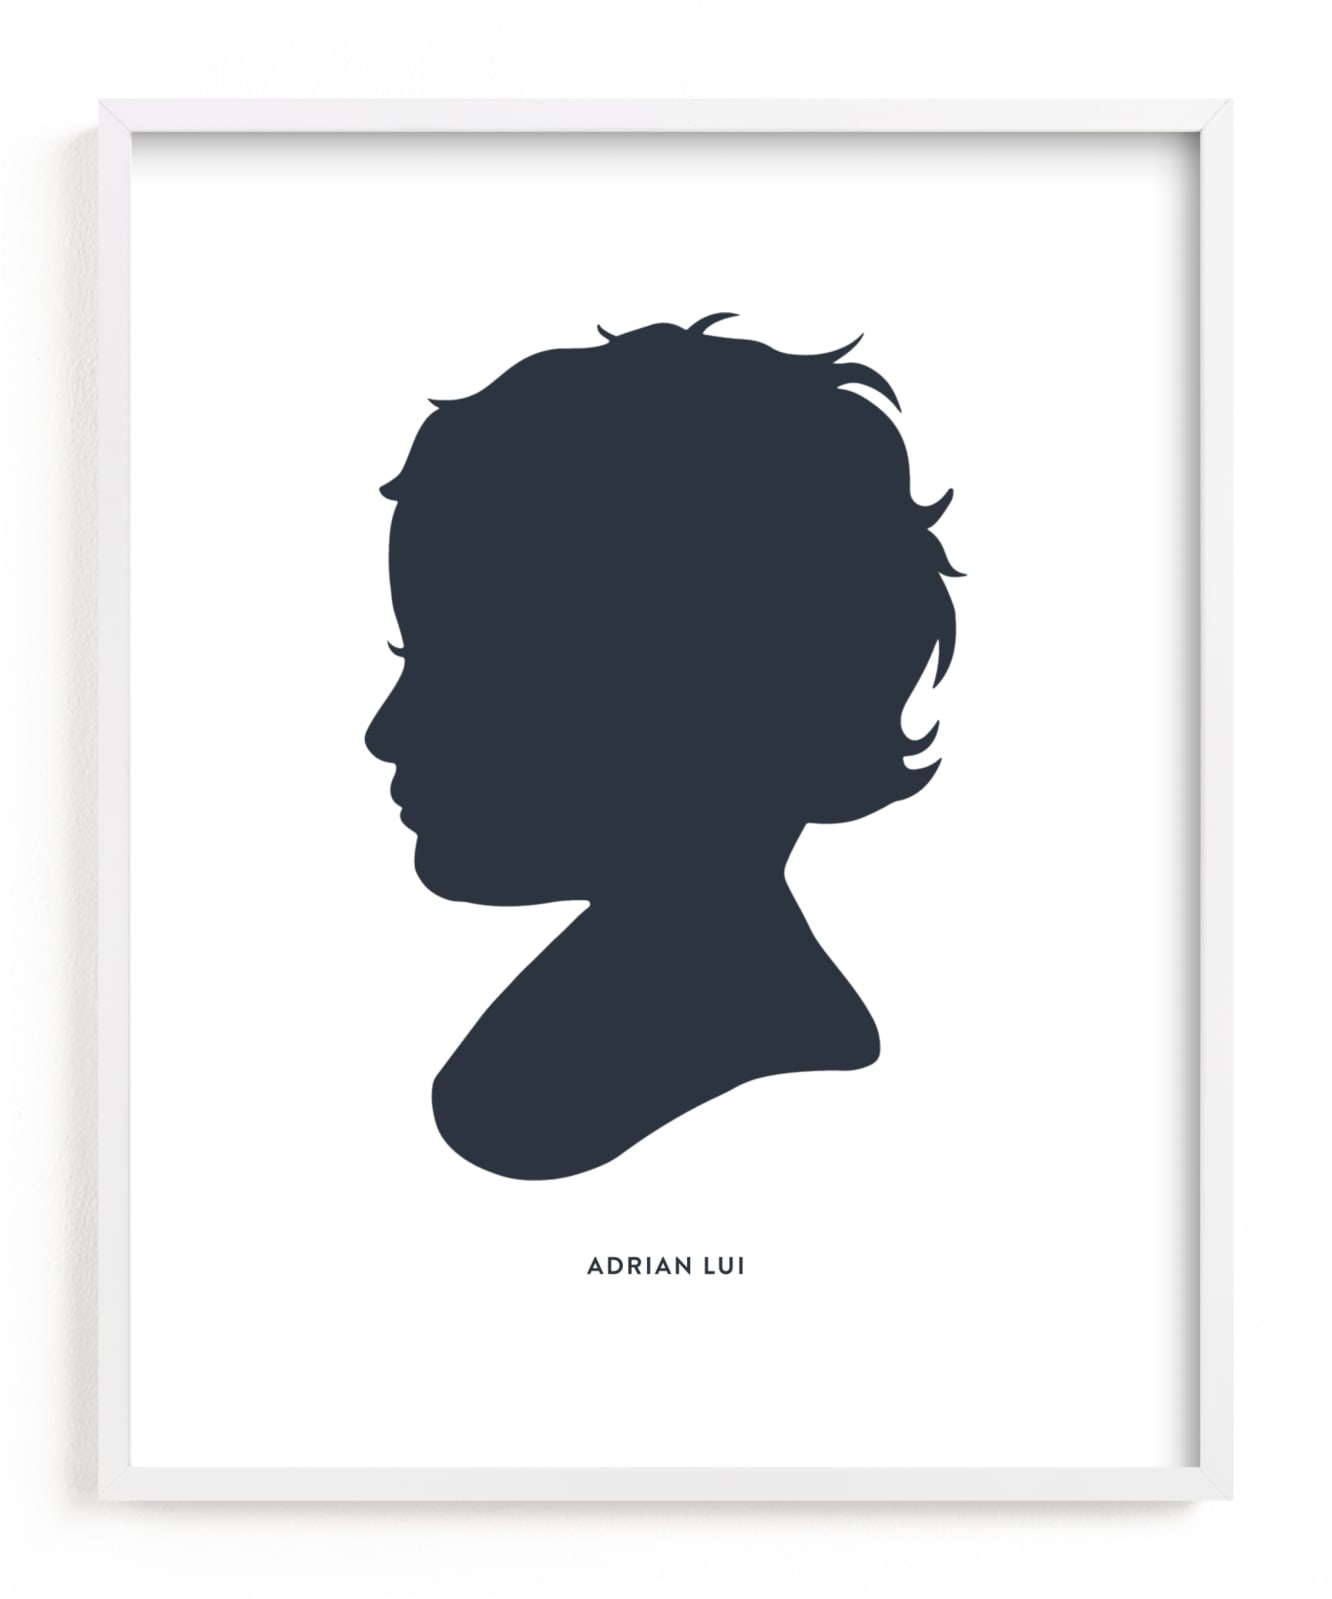 This is a blue silhouette art by Minted called Custom Silhouette Art.